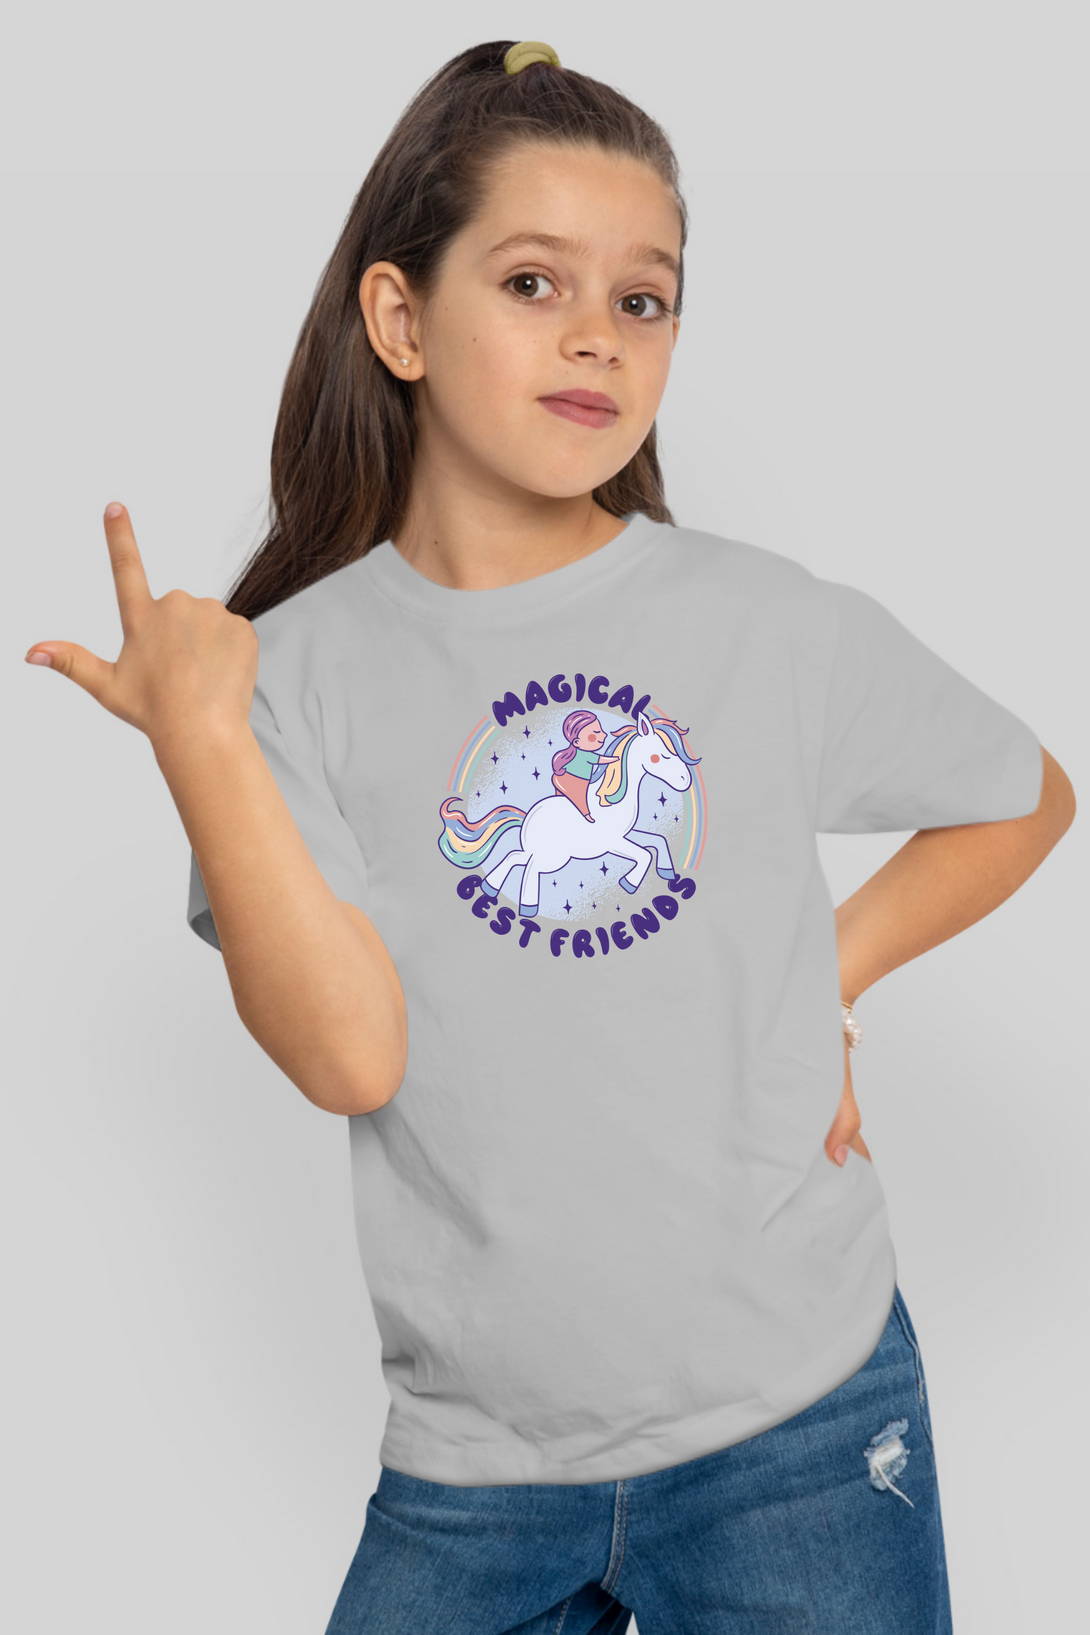 Magical Friend Printed T-Shirt For Girl - WowWaves - 12